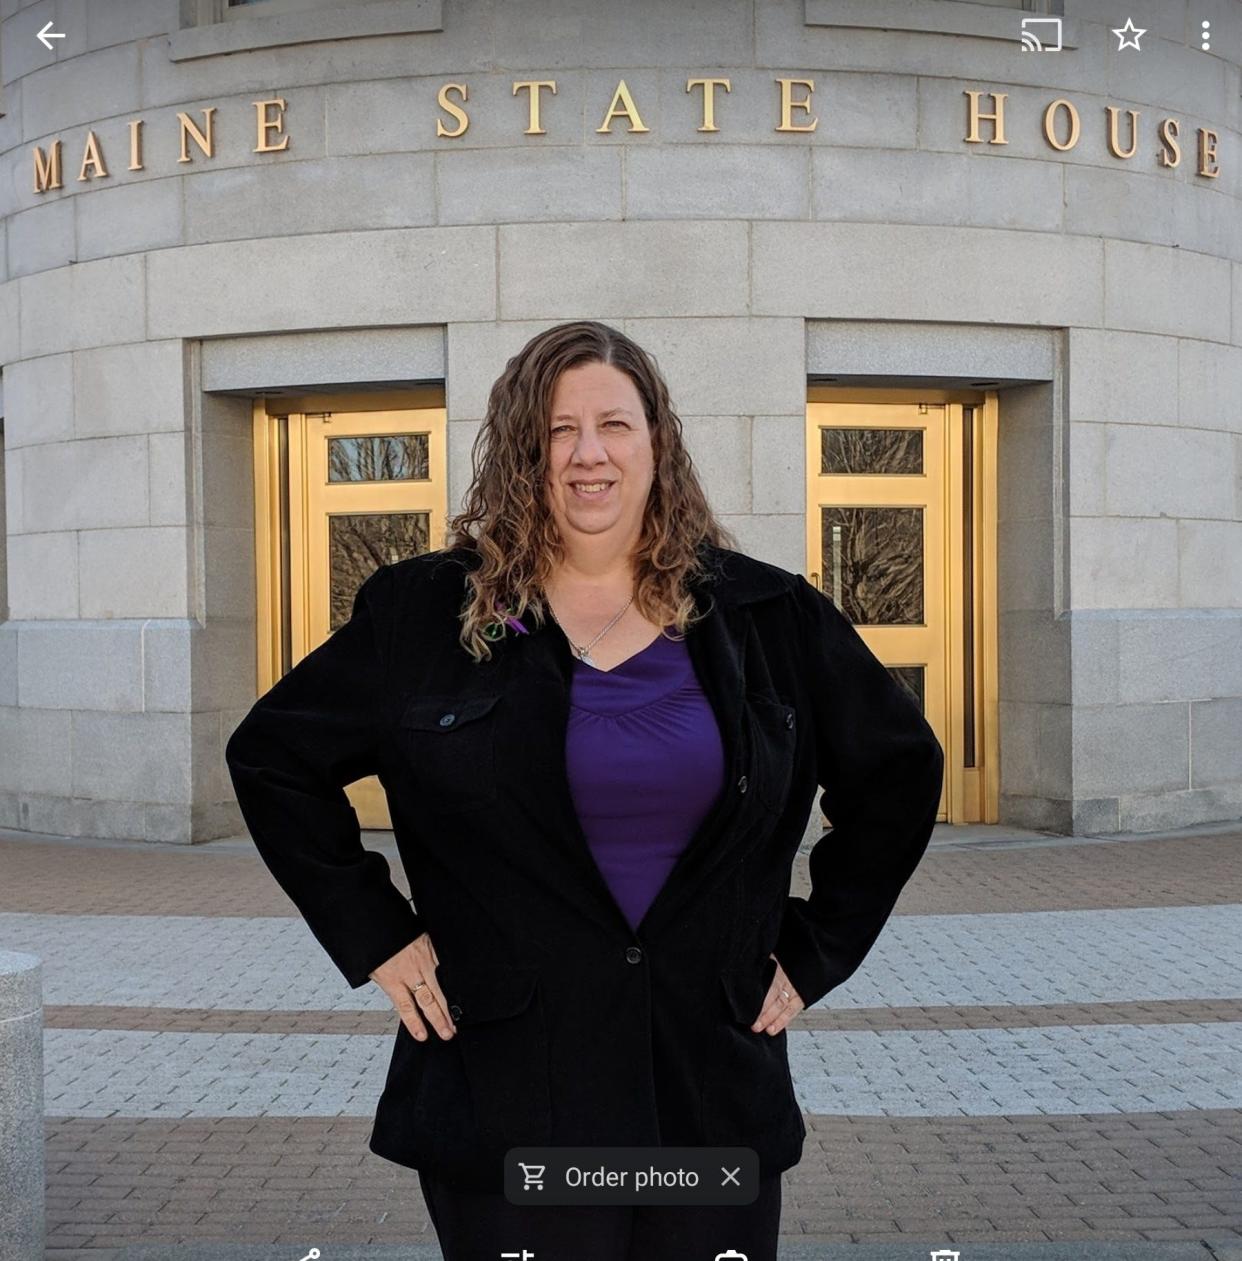 Susan Meehan, the president of the newly formed Maine Cannabis Union, is seen here at the State House in Augusta, where she frequently advocates for stakeholders in the cannabis movement and industry.